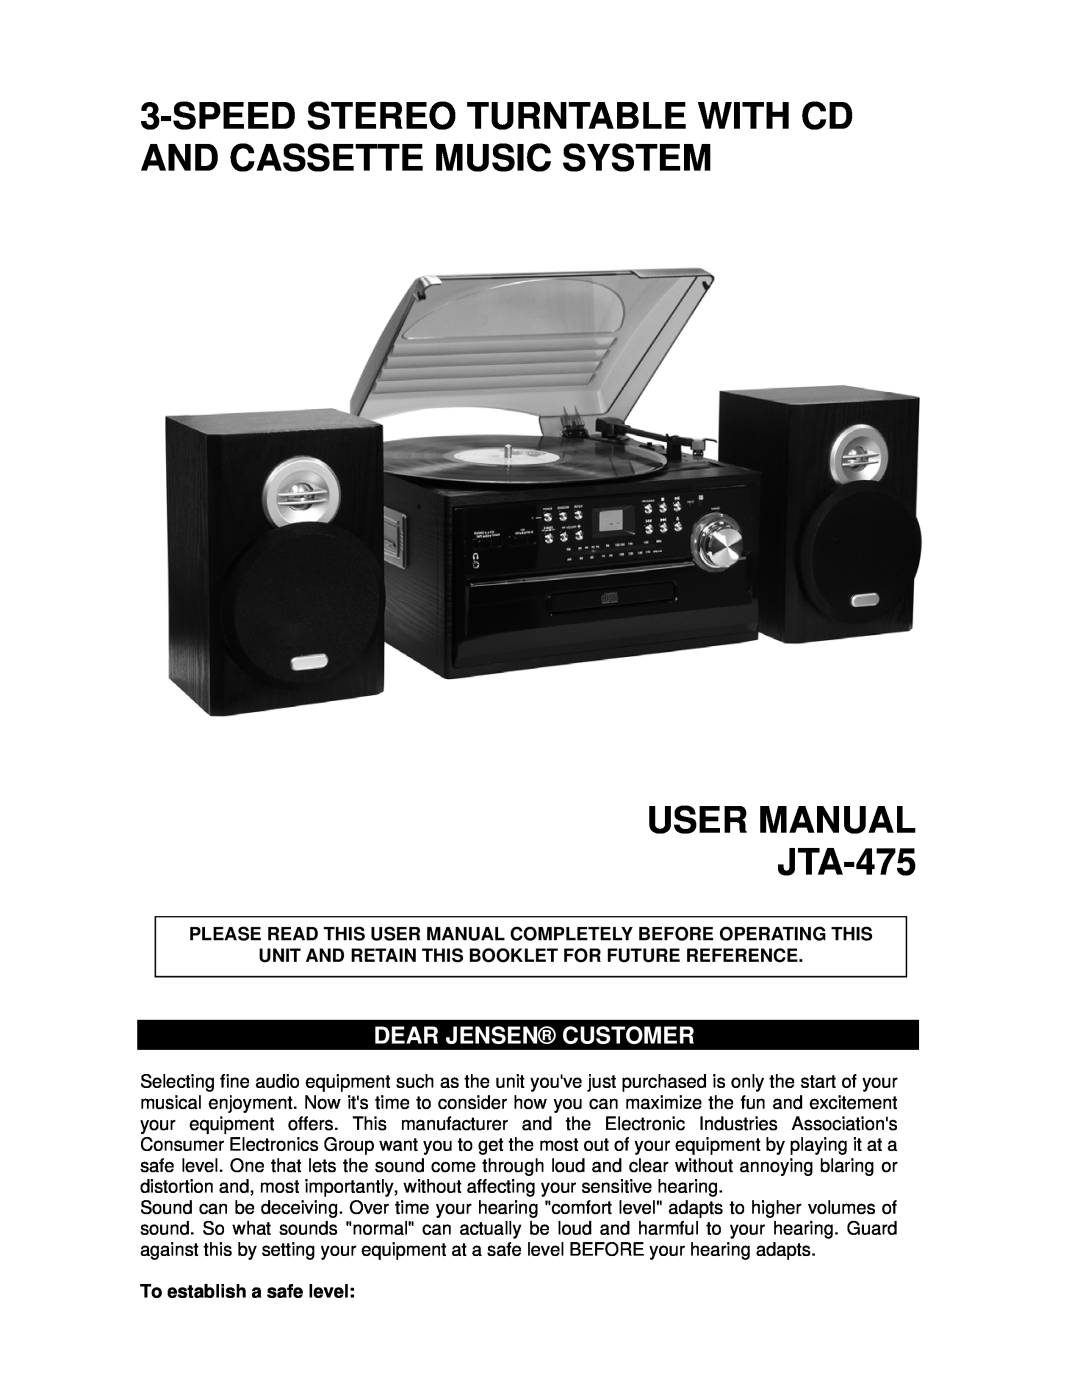 Jensen JTA-475 user manual Dear Jensen Customer, Unit And Retain This Booklet For Future Reference 